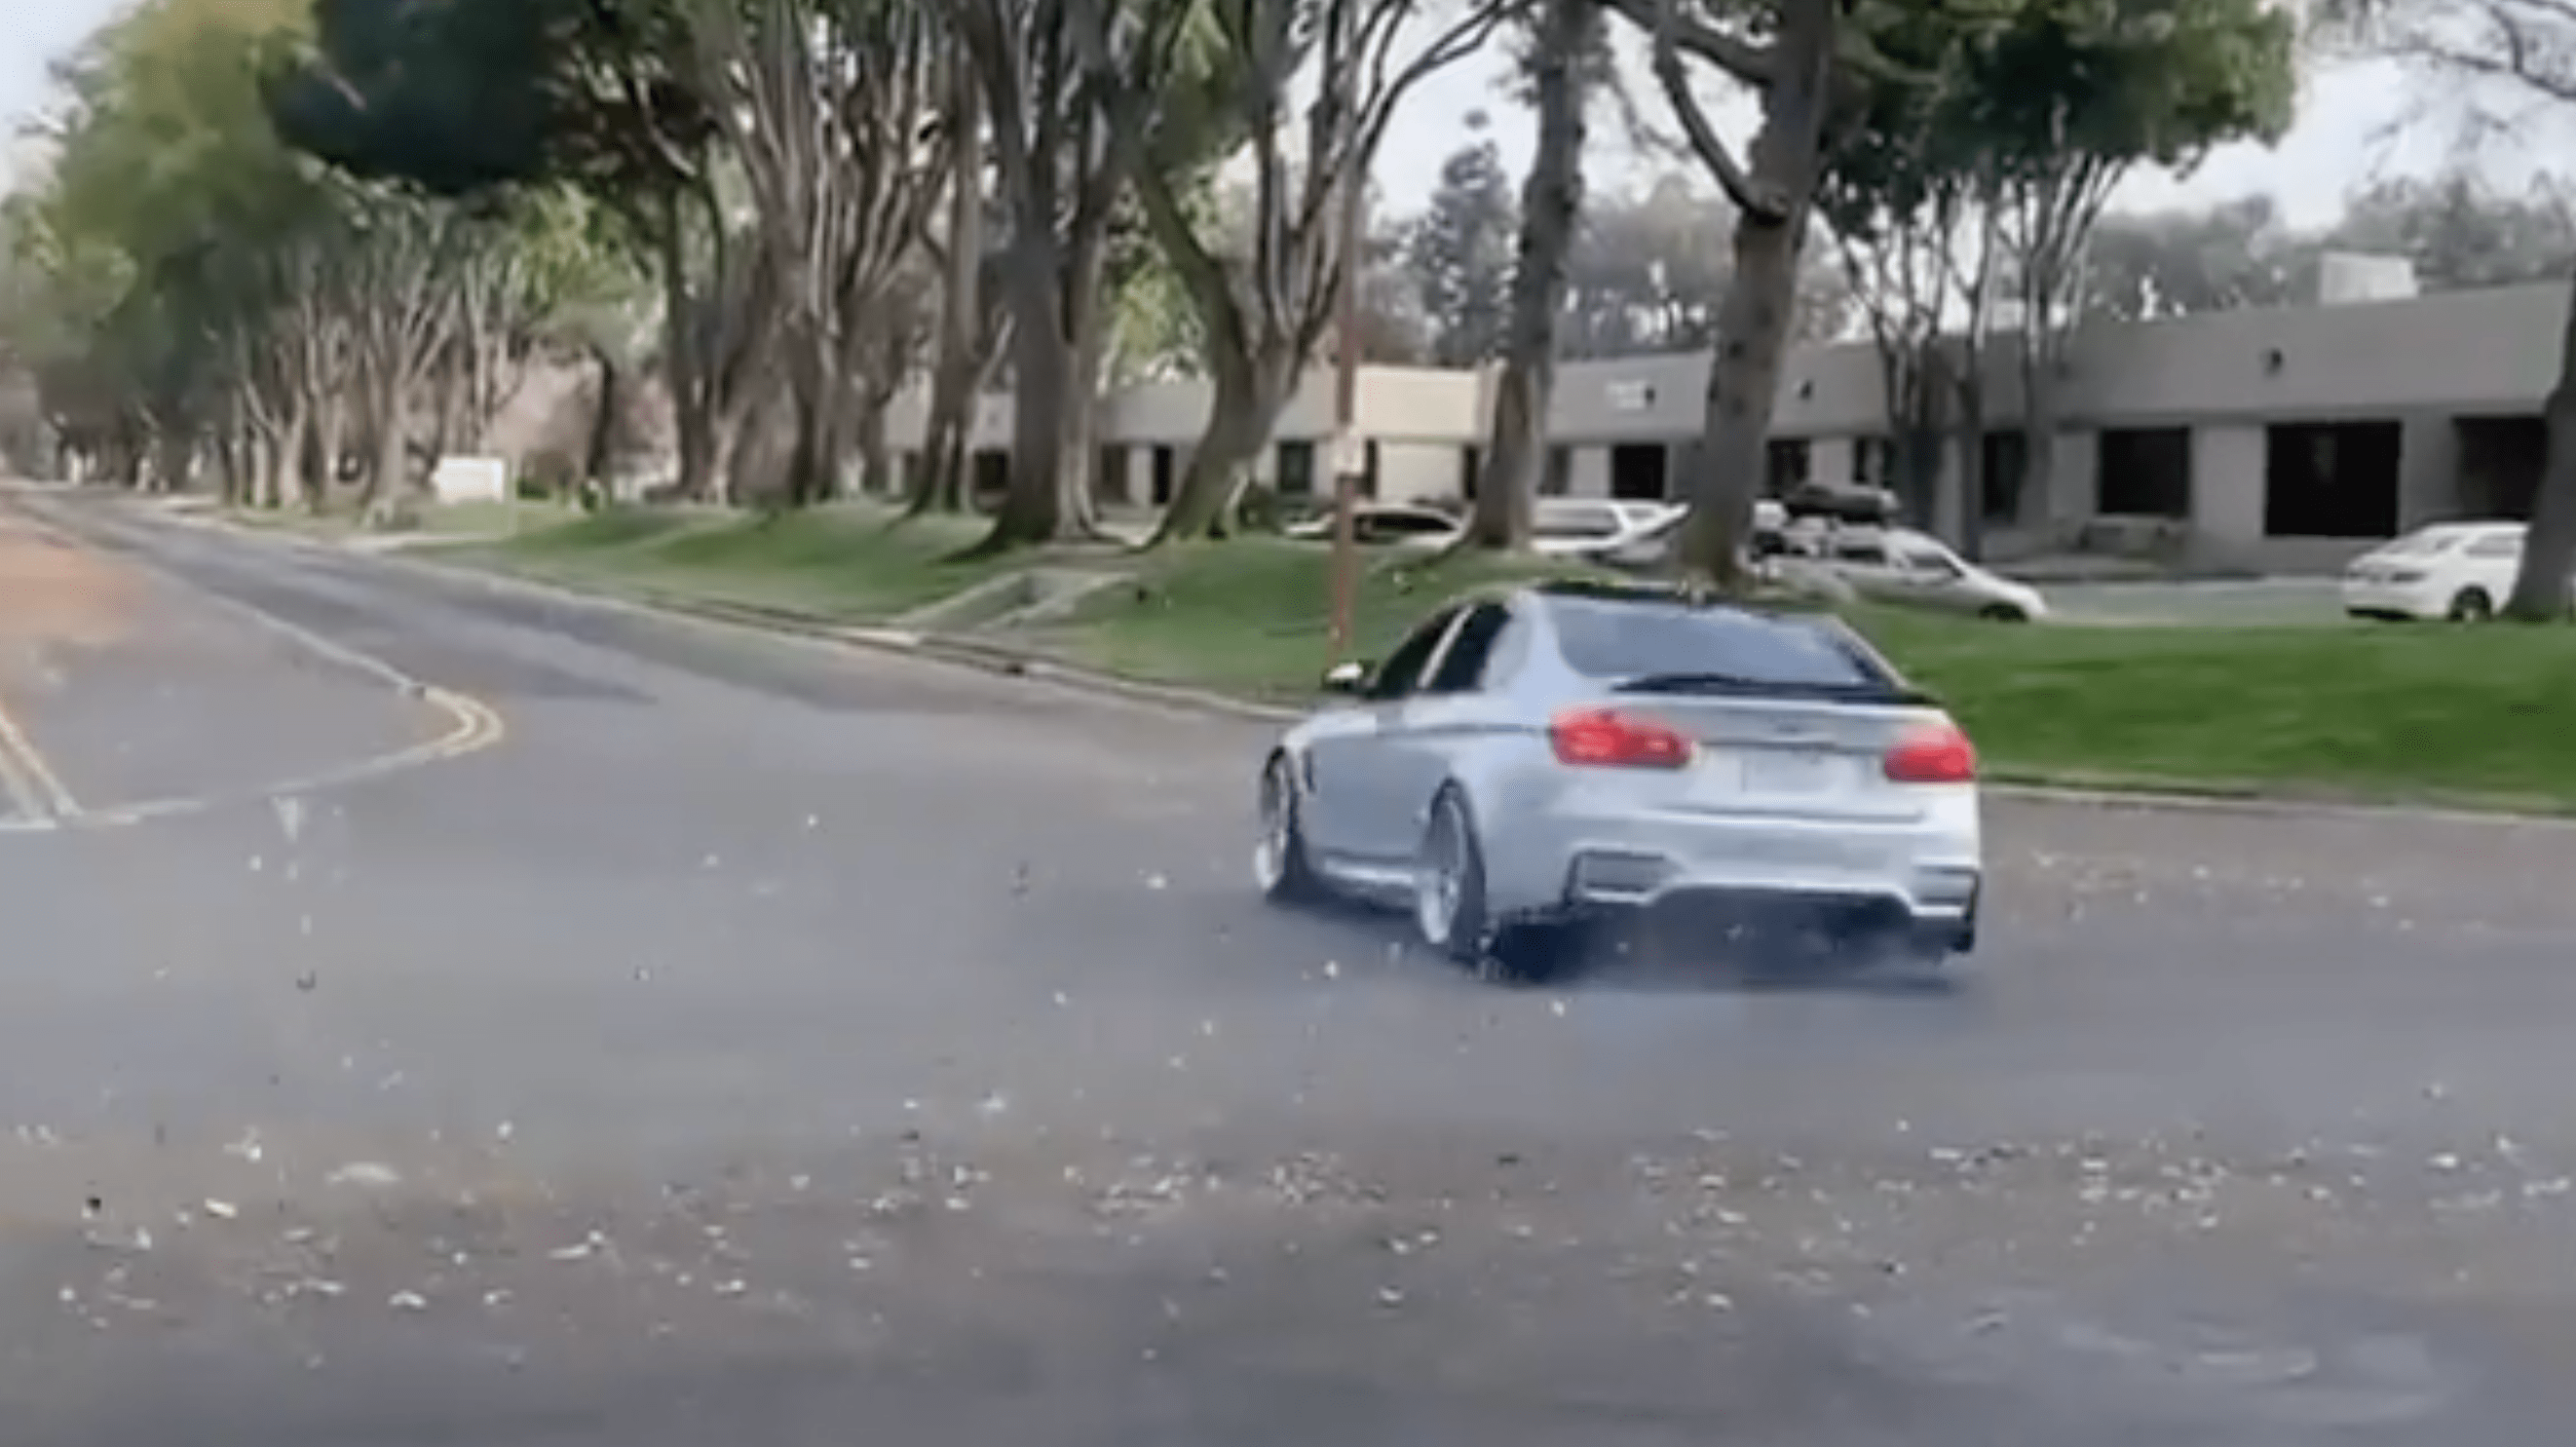 When Keeping It Wheel Goes Wrong: BMW M3 Edition